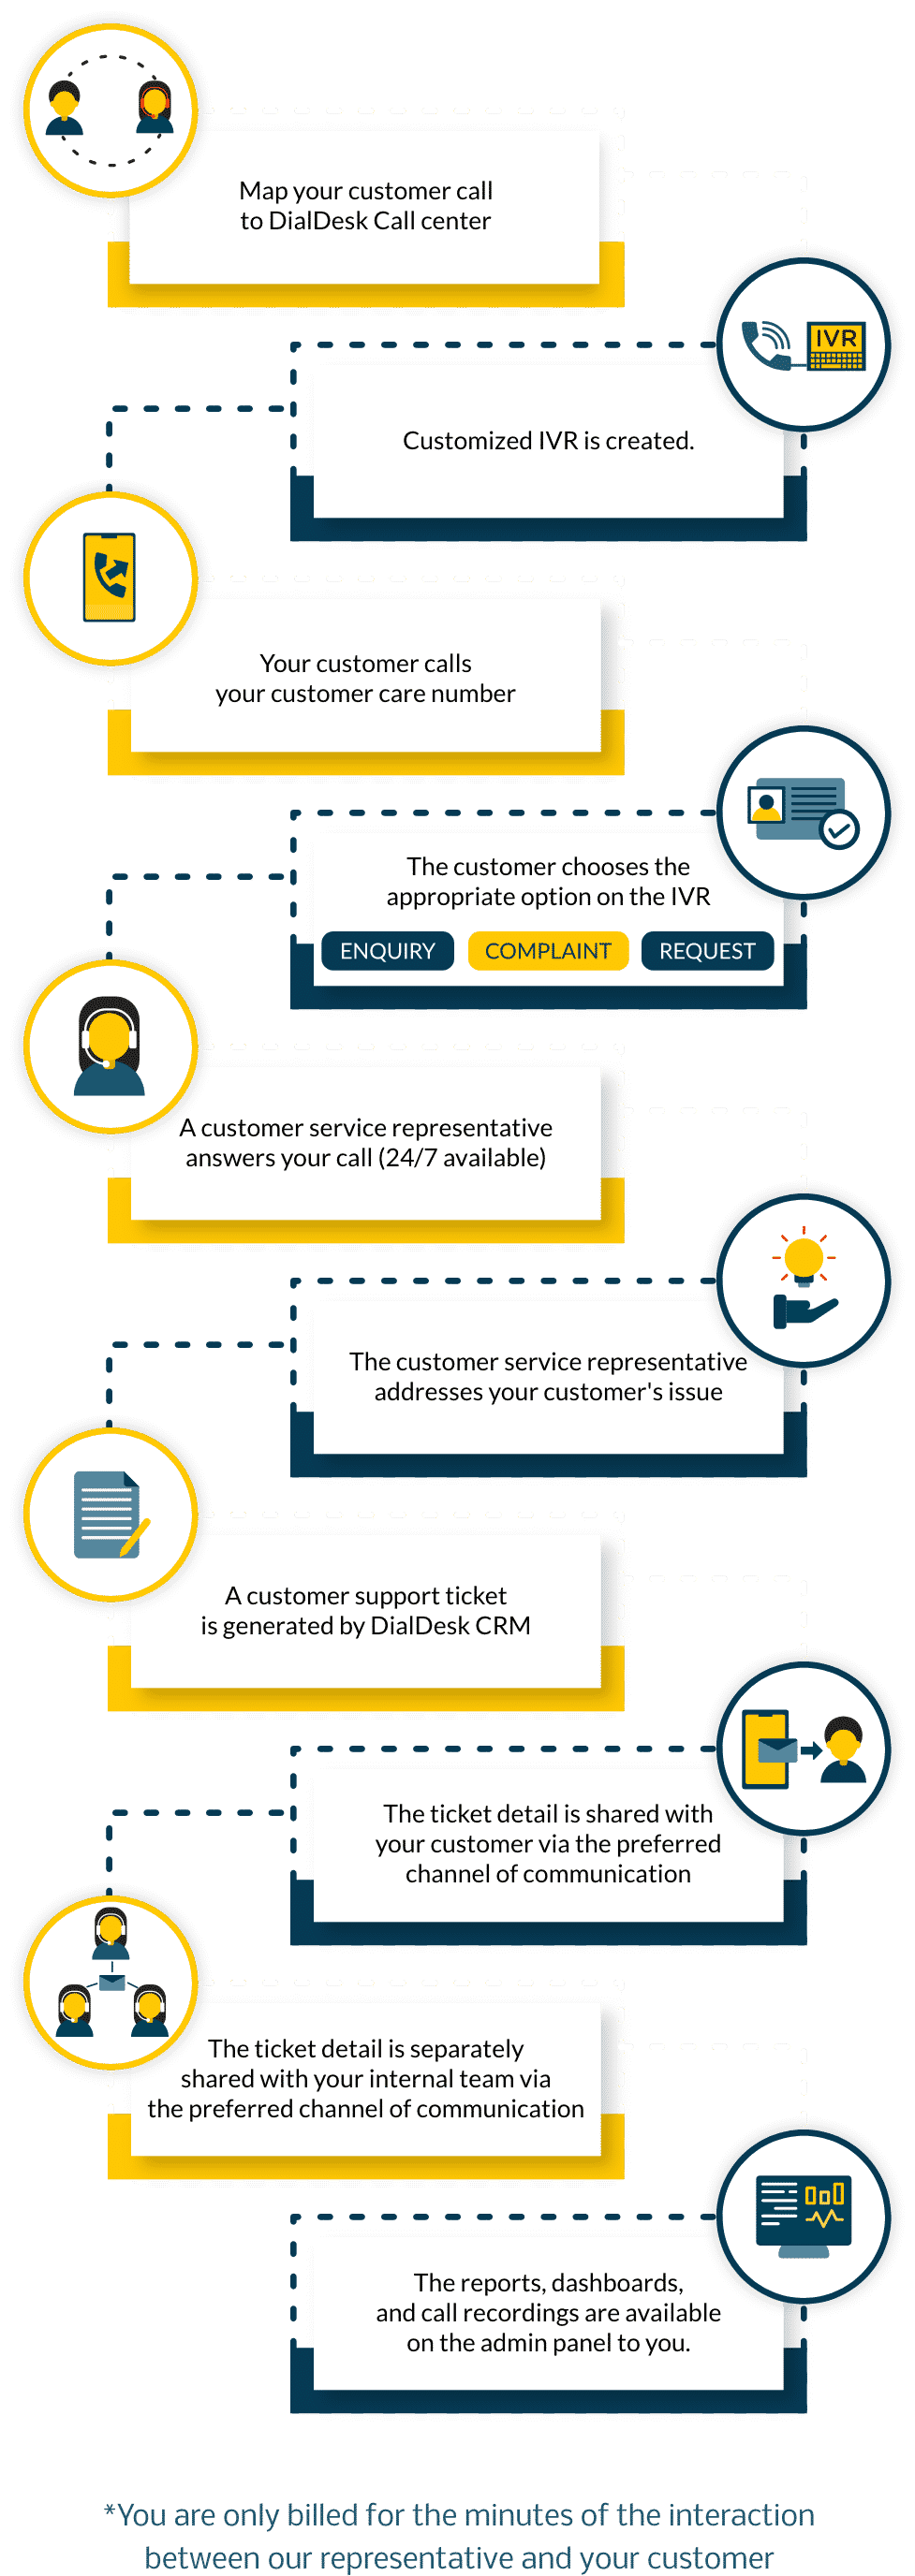 How DialDesk Works - Complete Workflow Diagram